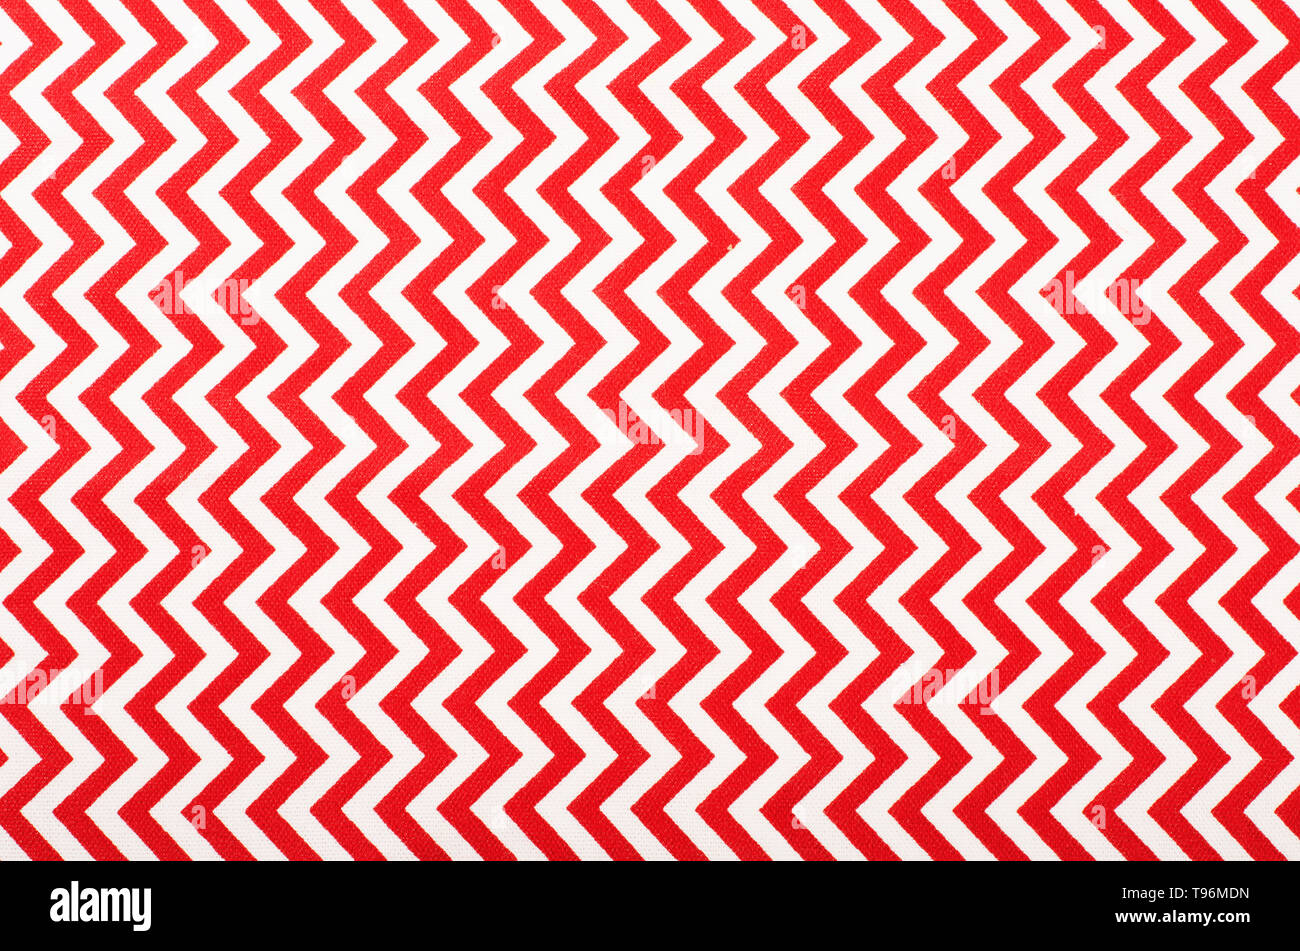 https://c8.alamy.com/comp/T96MDN/pattern-stripe-seamless-red-and-white-colors-textile-texture-wave-stripe-abstract-background-T96MDN.jpg